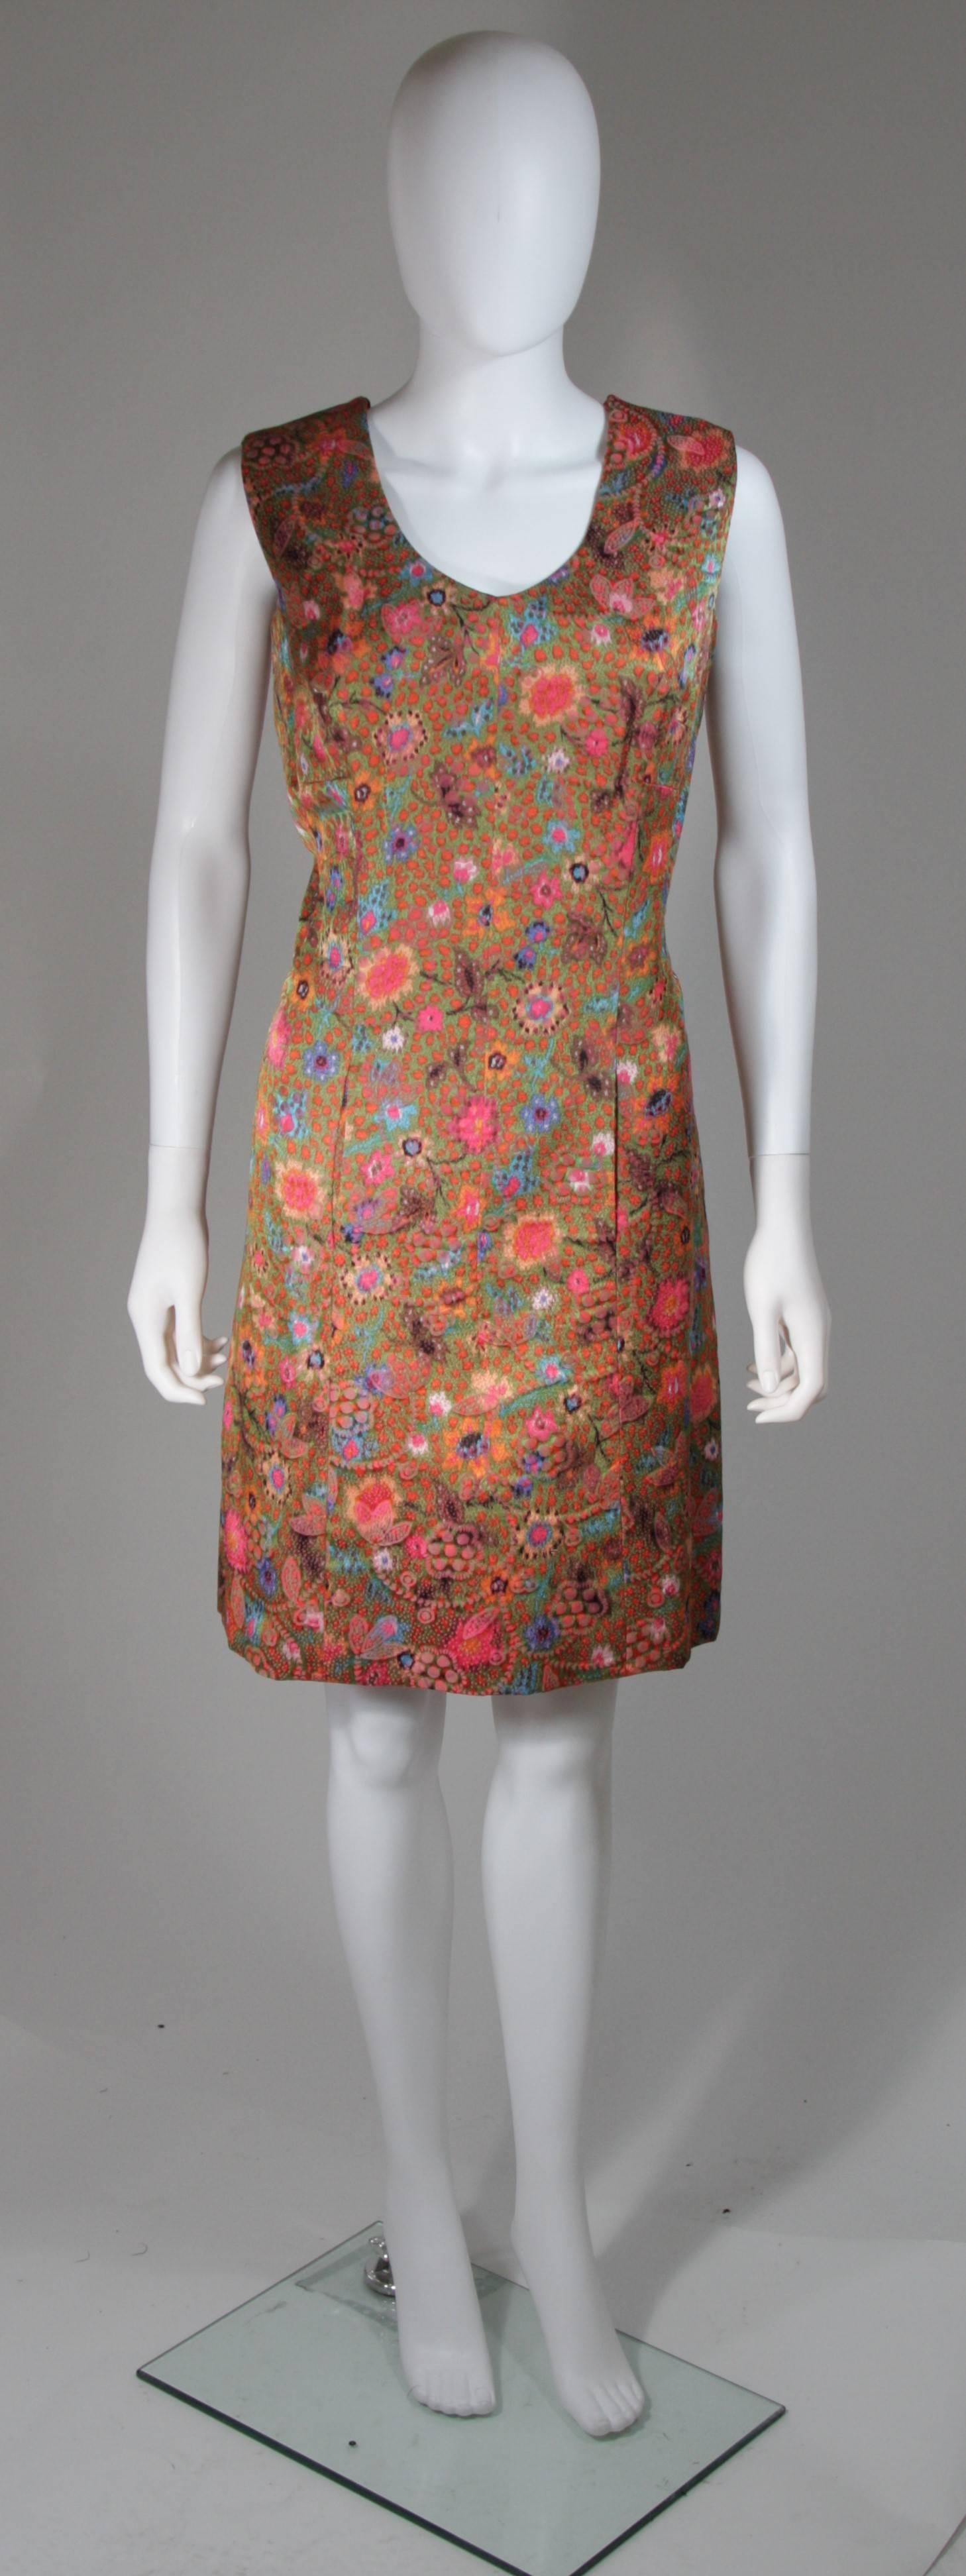 This Galanos dress is composed of a lovely and vibrant floral print fabric. It is lined with a beautiful pink silk and features a side zipper as well hook and closures on the shoulder, for ease of access. There are front pockets which align to lay